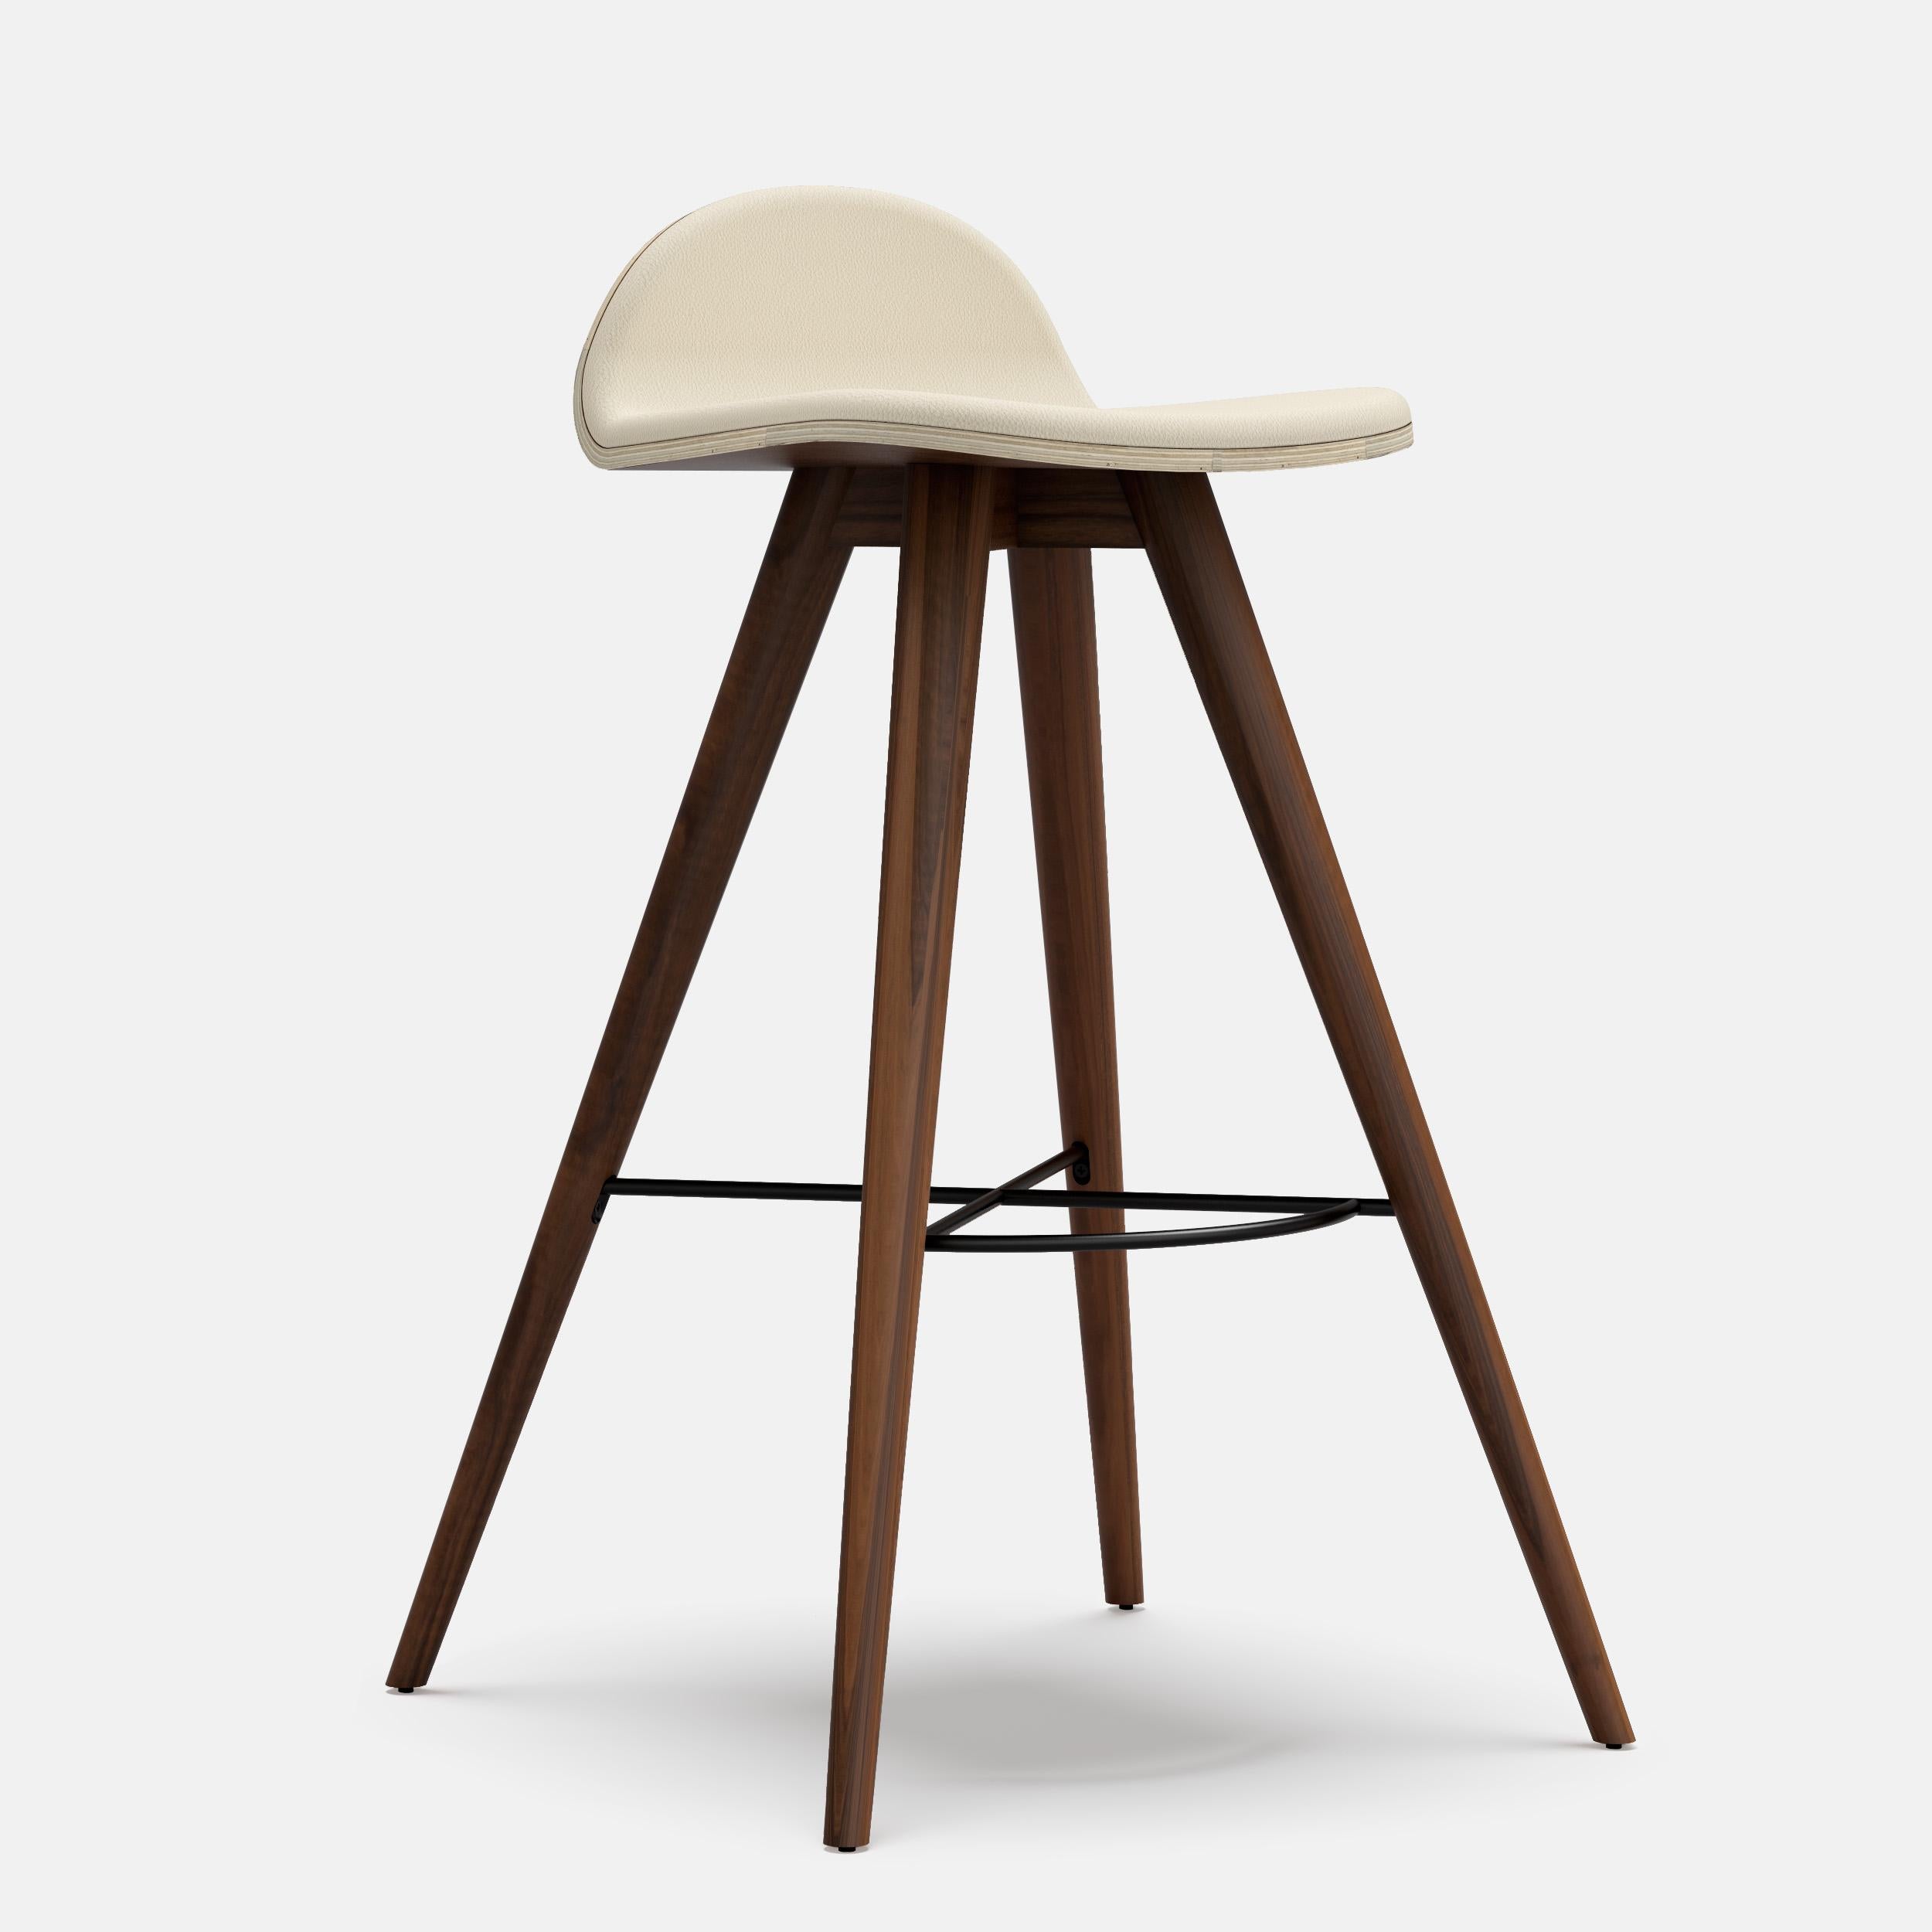 Walnut and fabric contemporary counter stool by Alexandre Caldas
Dimensions: W 49 x D 46 x H 79 cm
Materials: American solid walnut, fabric

Structure also available in beech, ash, oak, mix wood
Seat also available in fabric, leather,